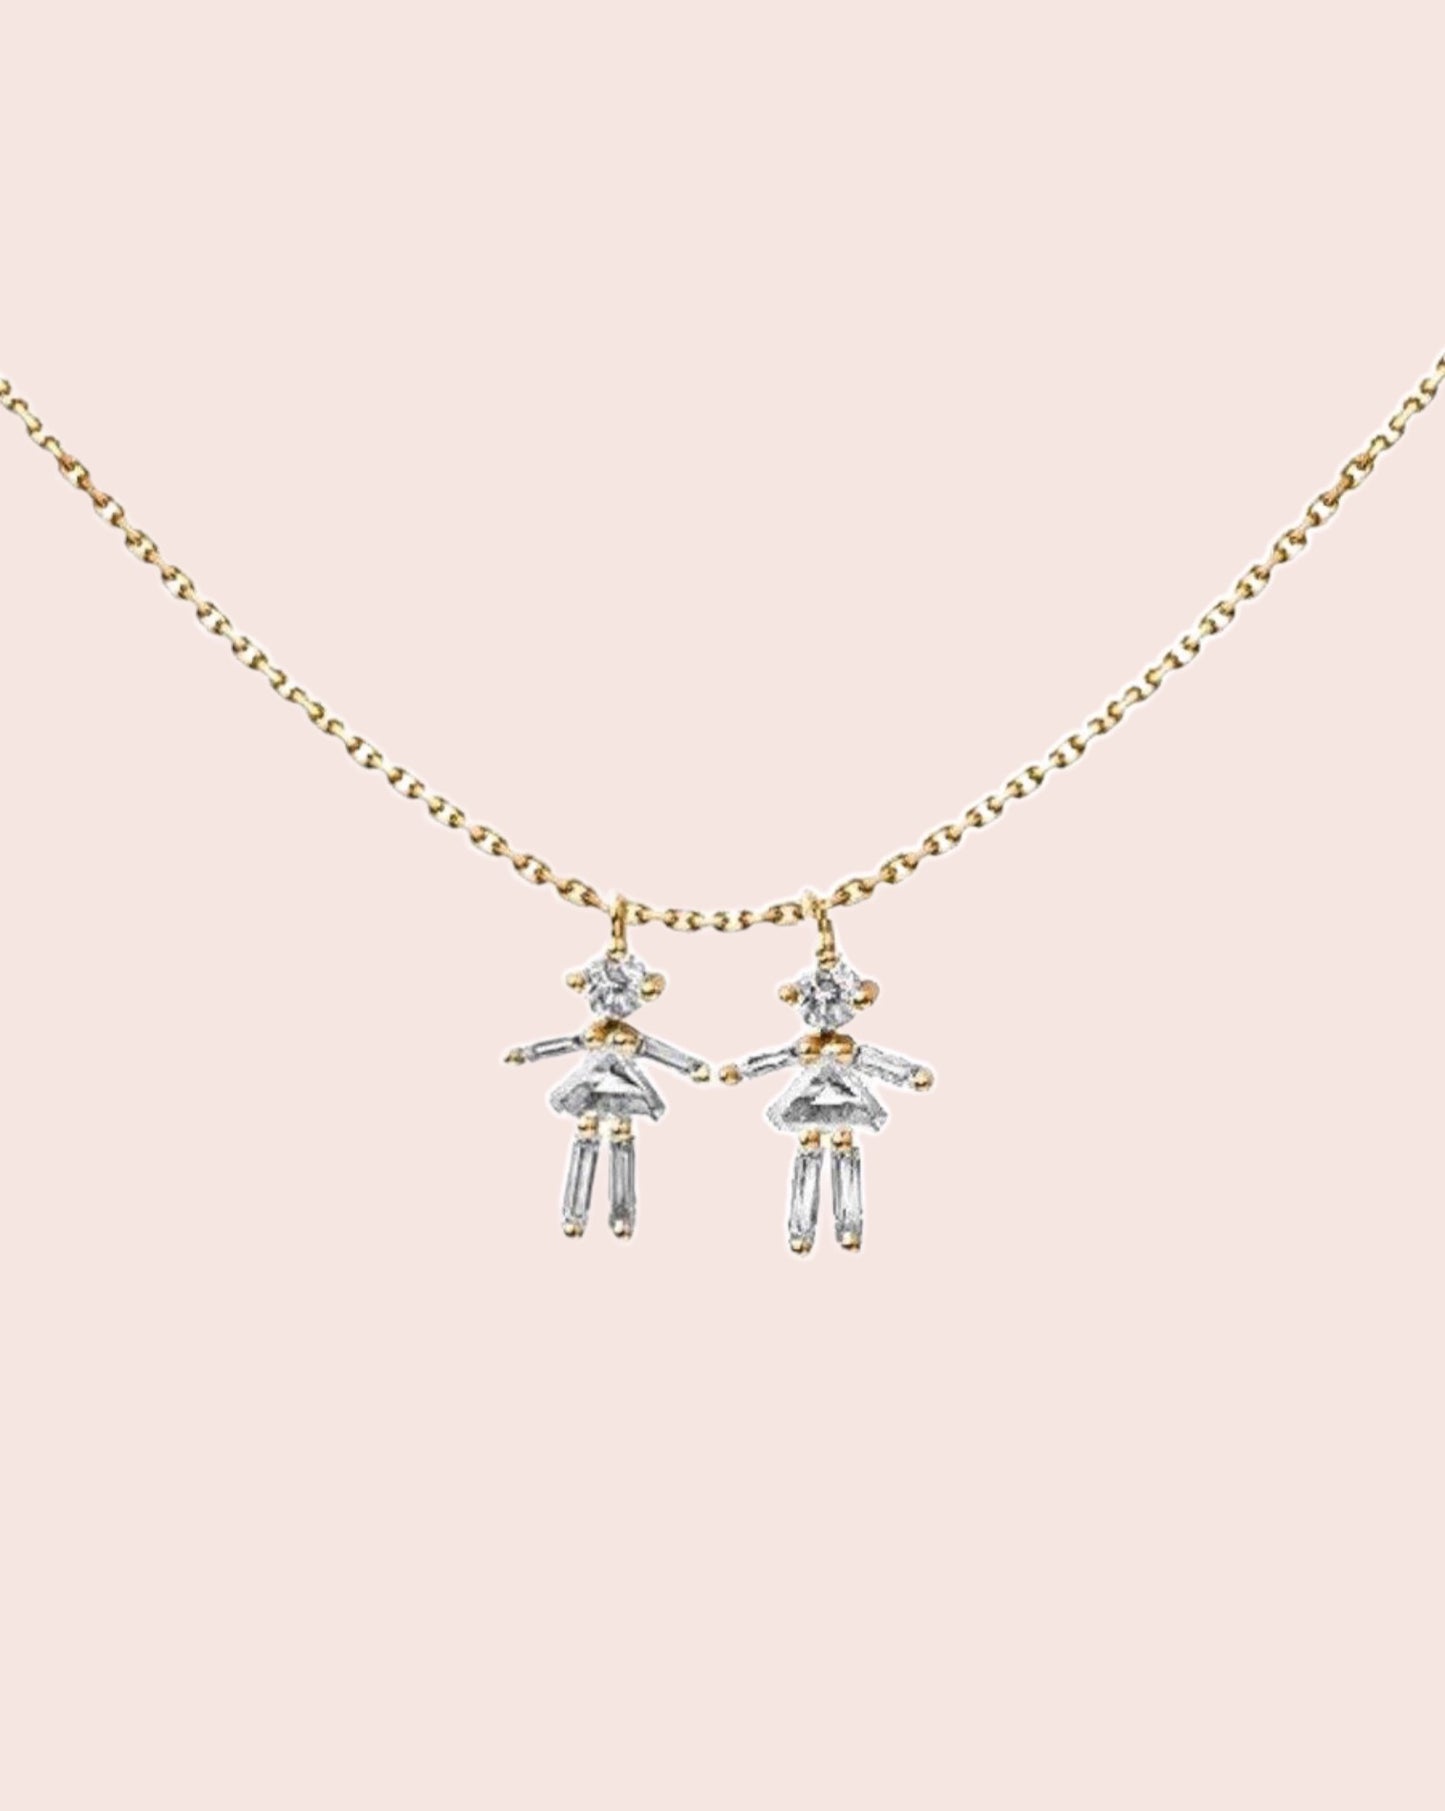 April-First-Berlin-Fine-Jewelry-18K-Gold-2-Little-Ones-Necklace